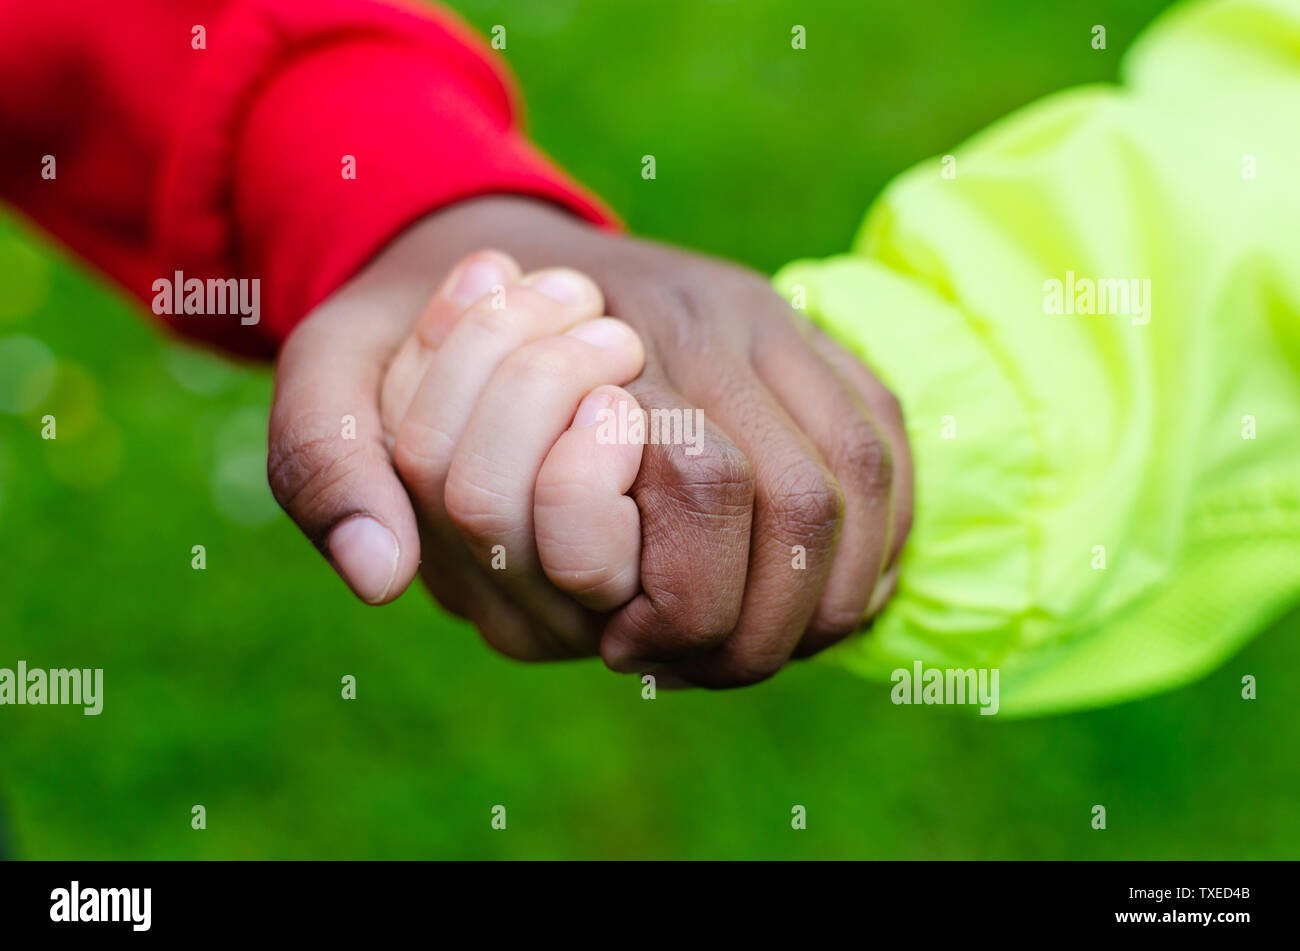 Two children of different races holding hands together. Photo shows friendship, equality and diversity. One Caucasian the other is dark (black). Stock Photo